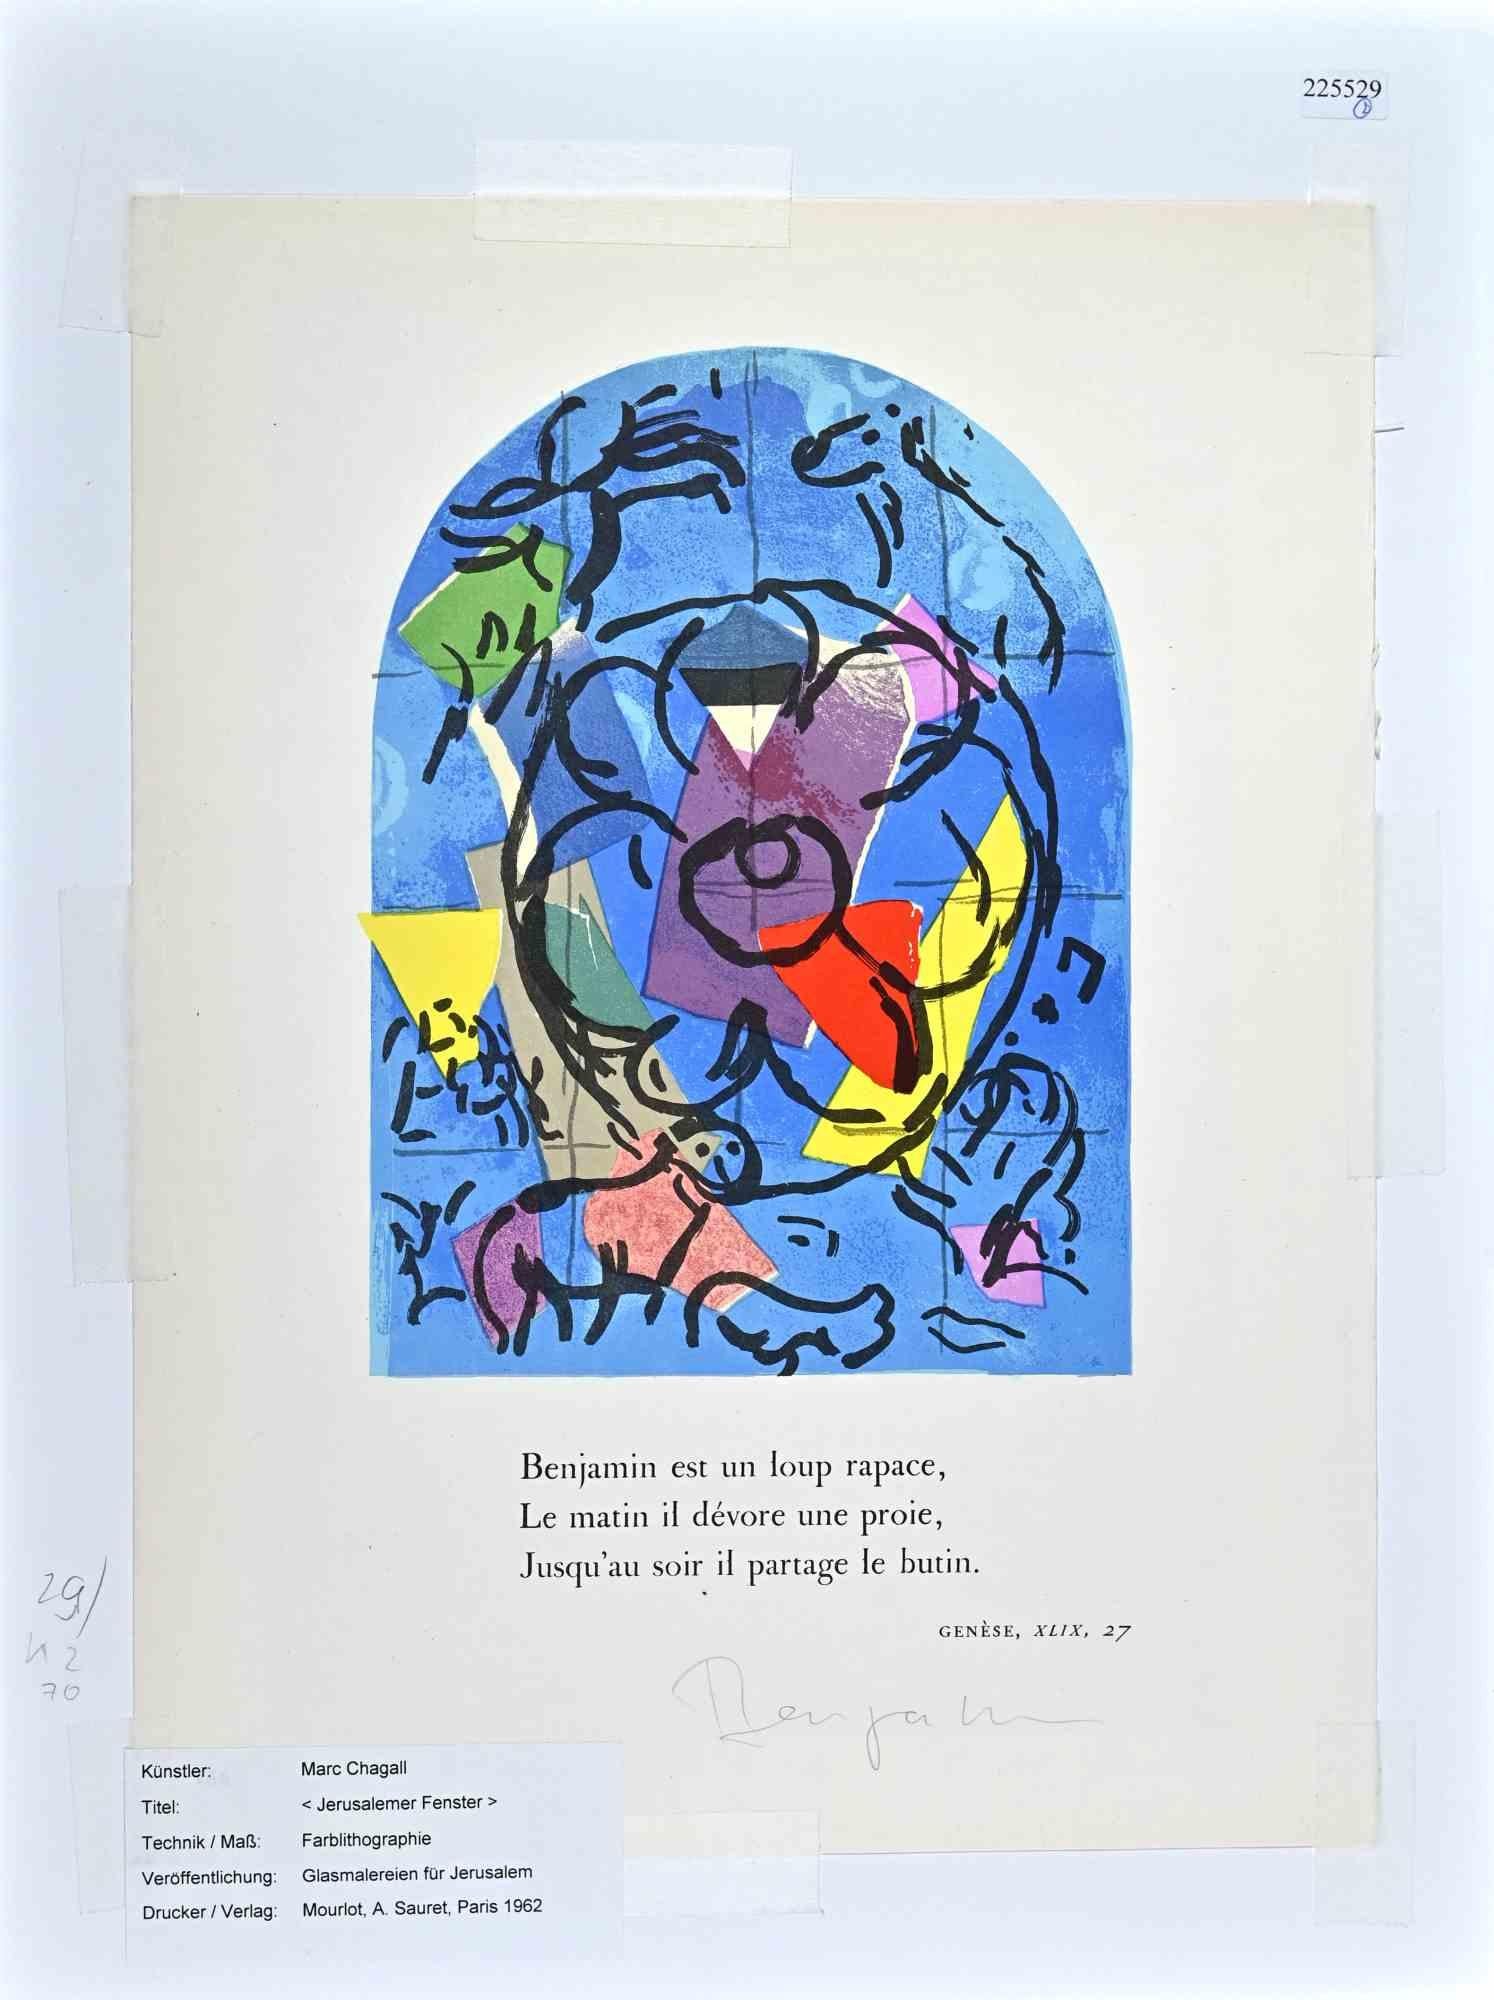 Genesys XLIX , 27 from Vitraux pour Jérusalem- Lithograph by Marc Chagall - 1962 For Sale 1